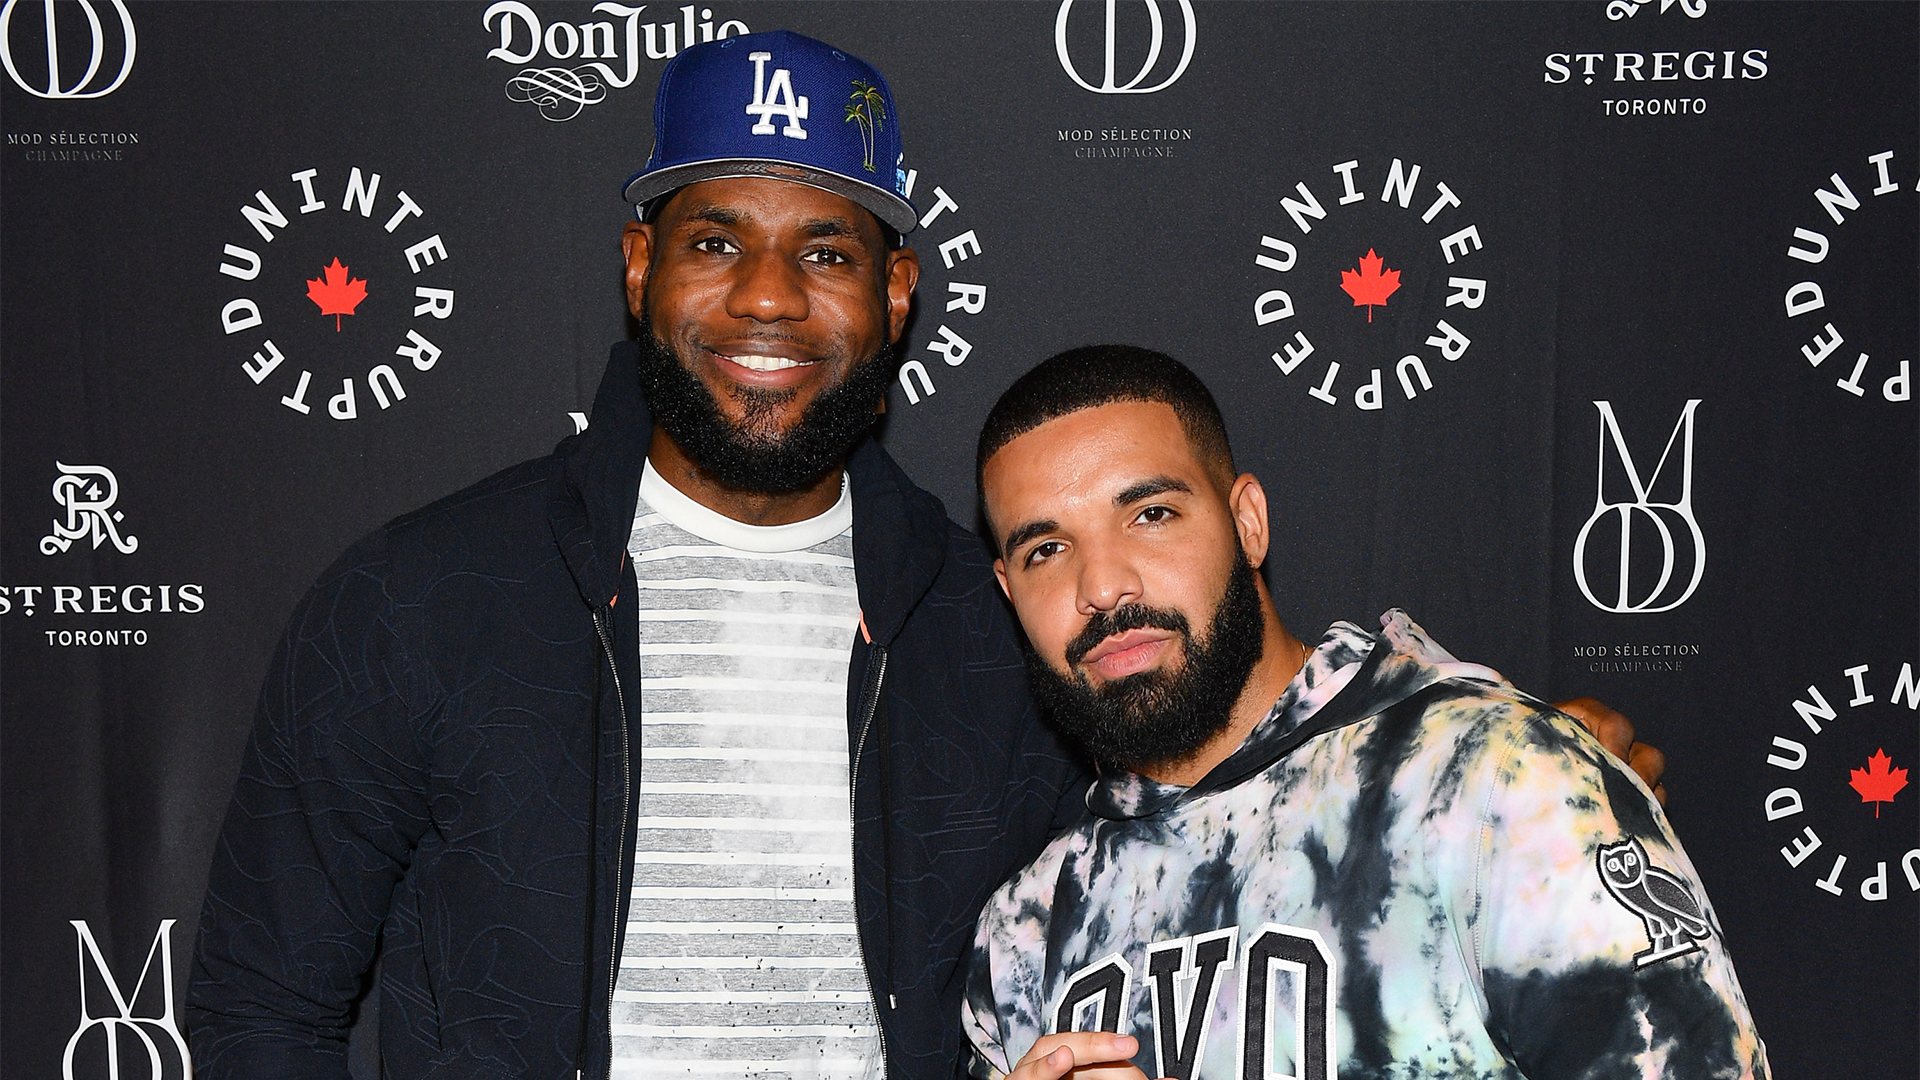 Drake Donates $1M To LeBron James' I Promise School After His 'Biggest Hit Ever' Playing Roulette